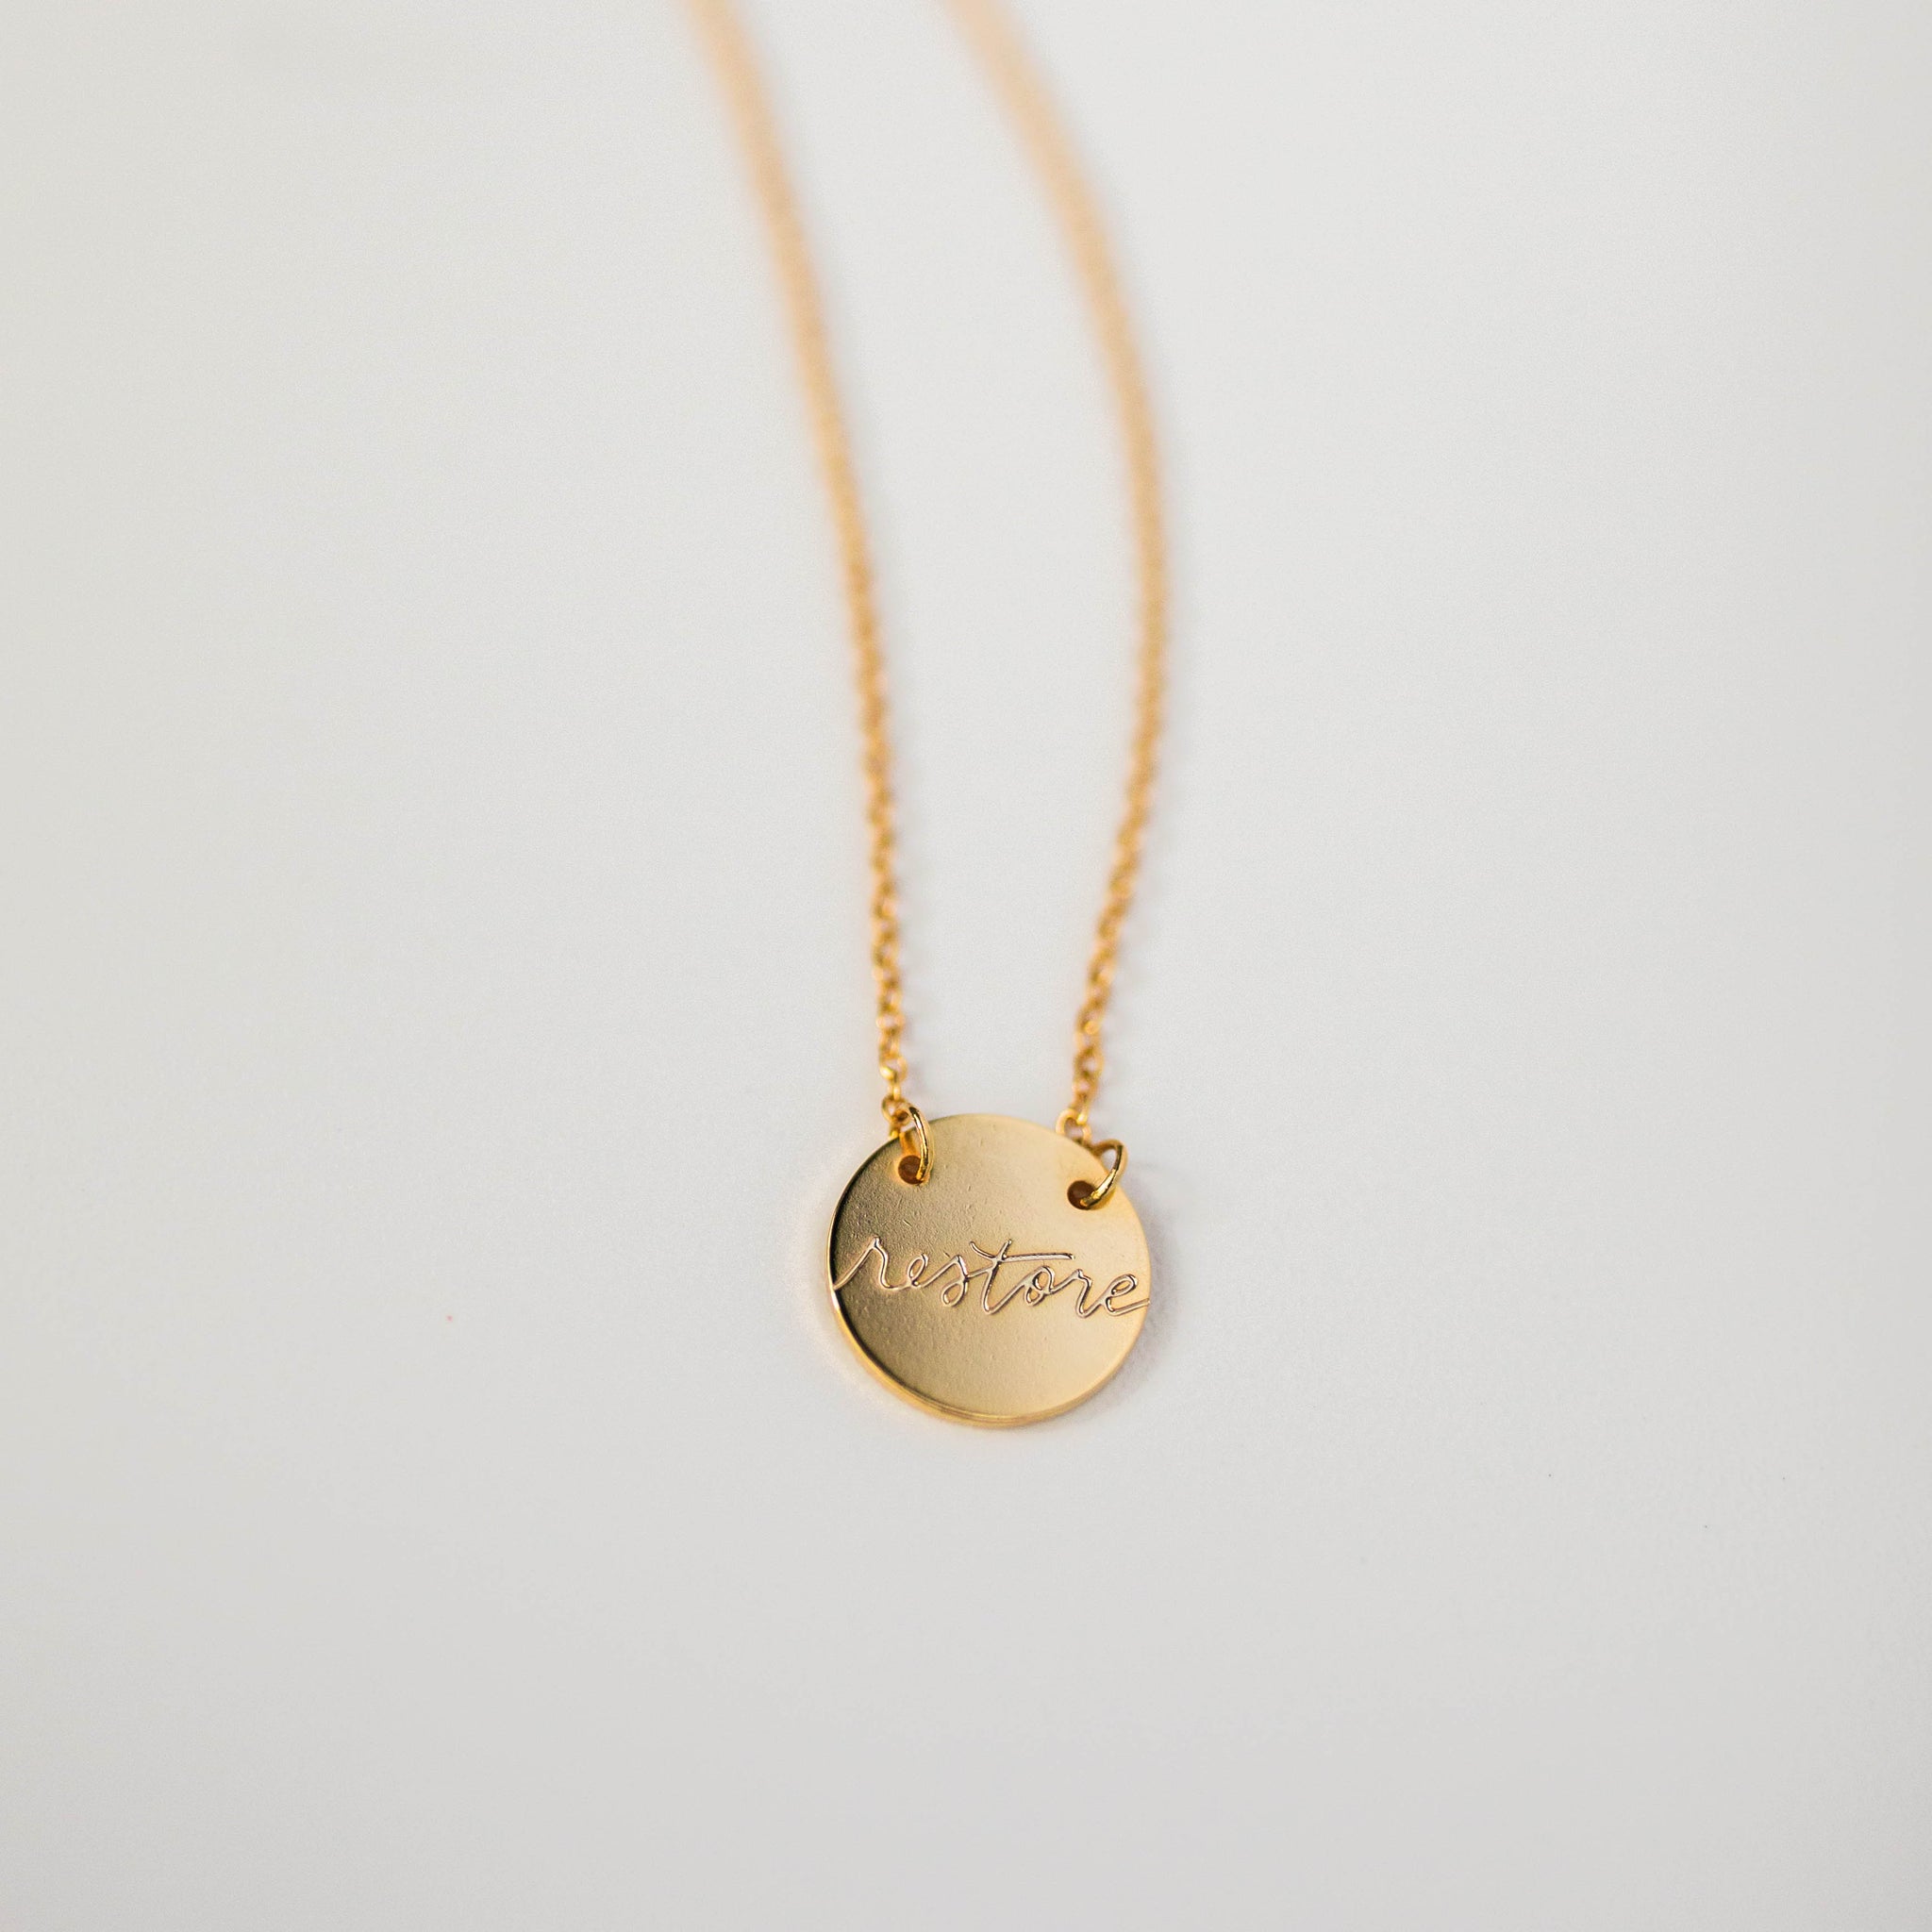 Restore Necklace – The Daily Grace Co.